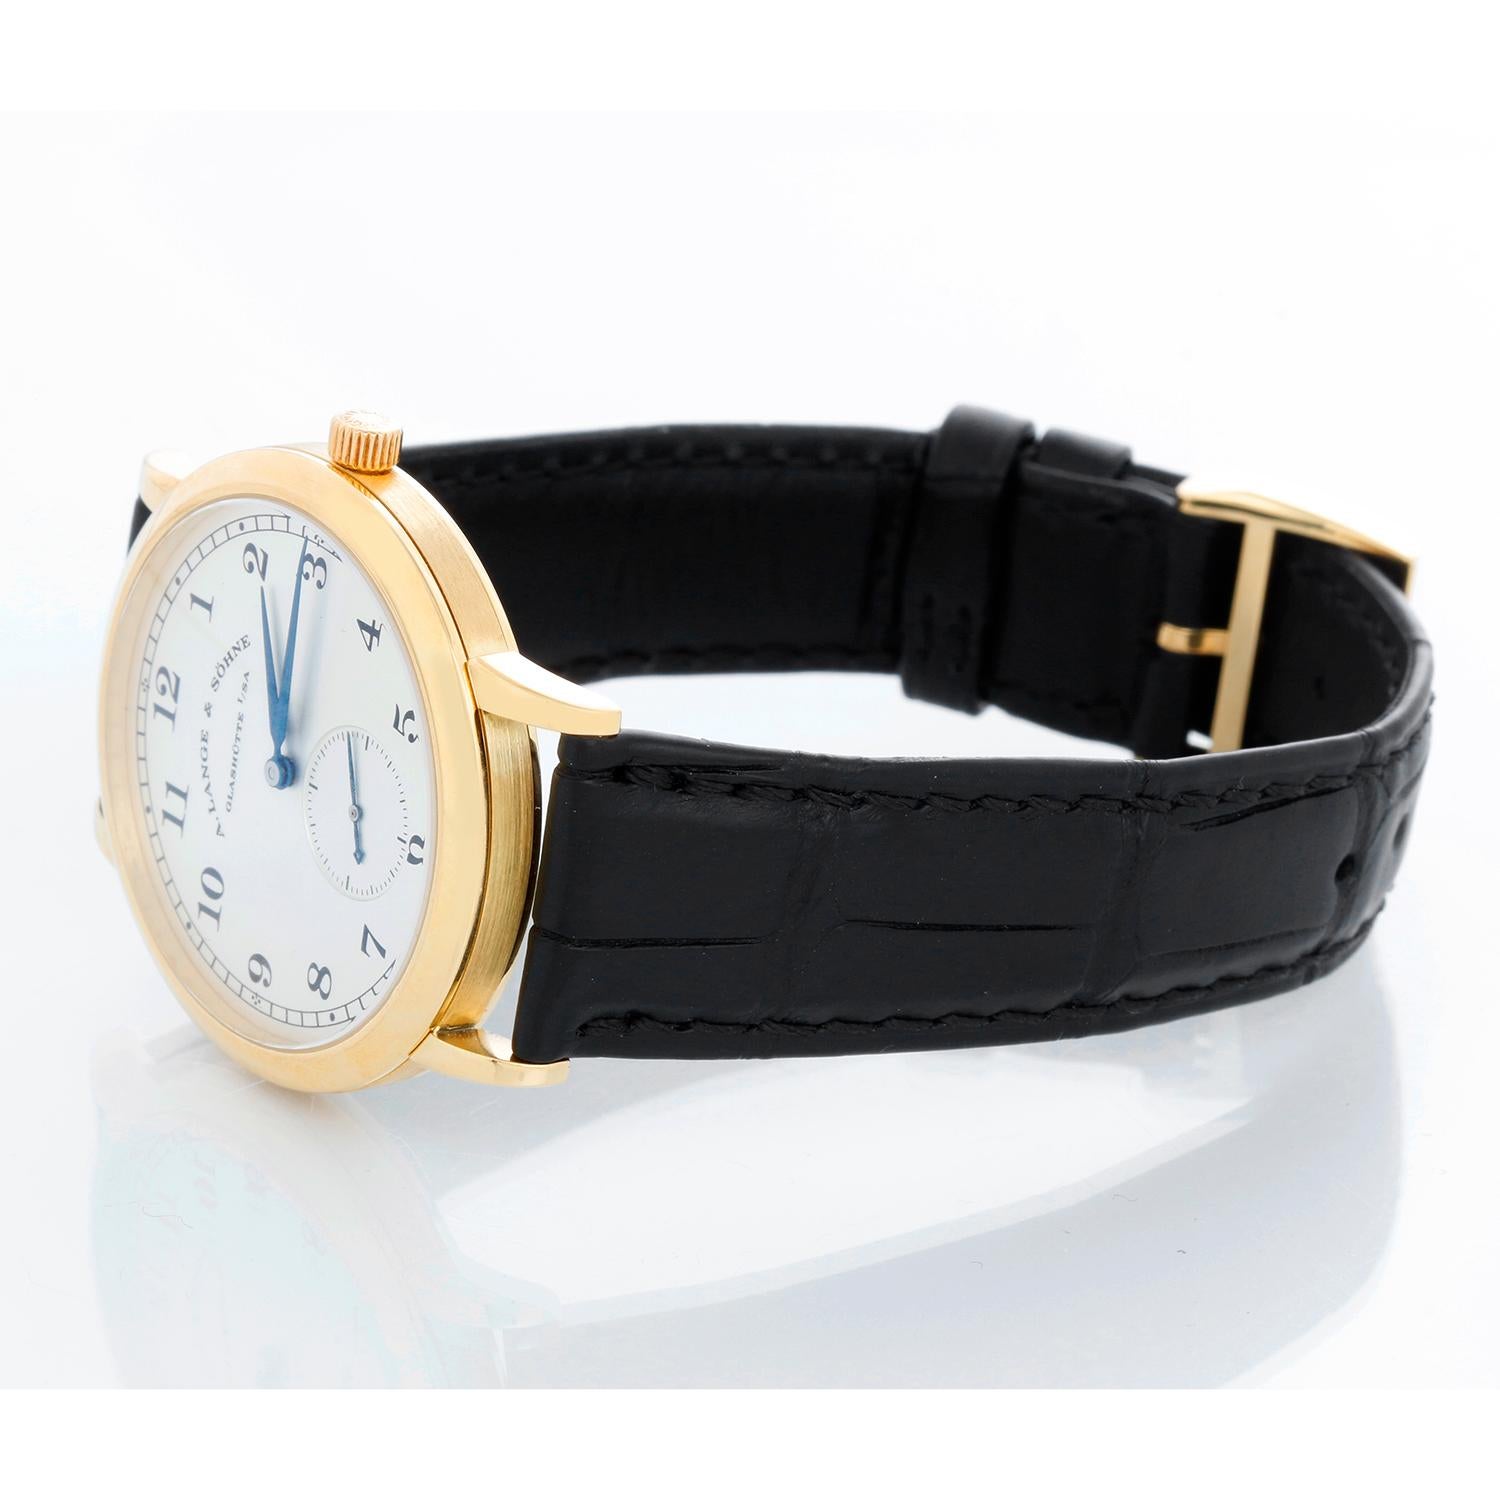 A. Lange & Sohne 1815 Men's Yellow Gold Watch 206.032 - Manual winding. Yellow Gold case with exhibition back (36mm diameter). Silver dial with Arabic numerals; sub-seconds dial. Black croc strap band with yellow gold Lange buckle. Pre-owned with